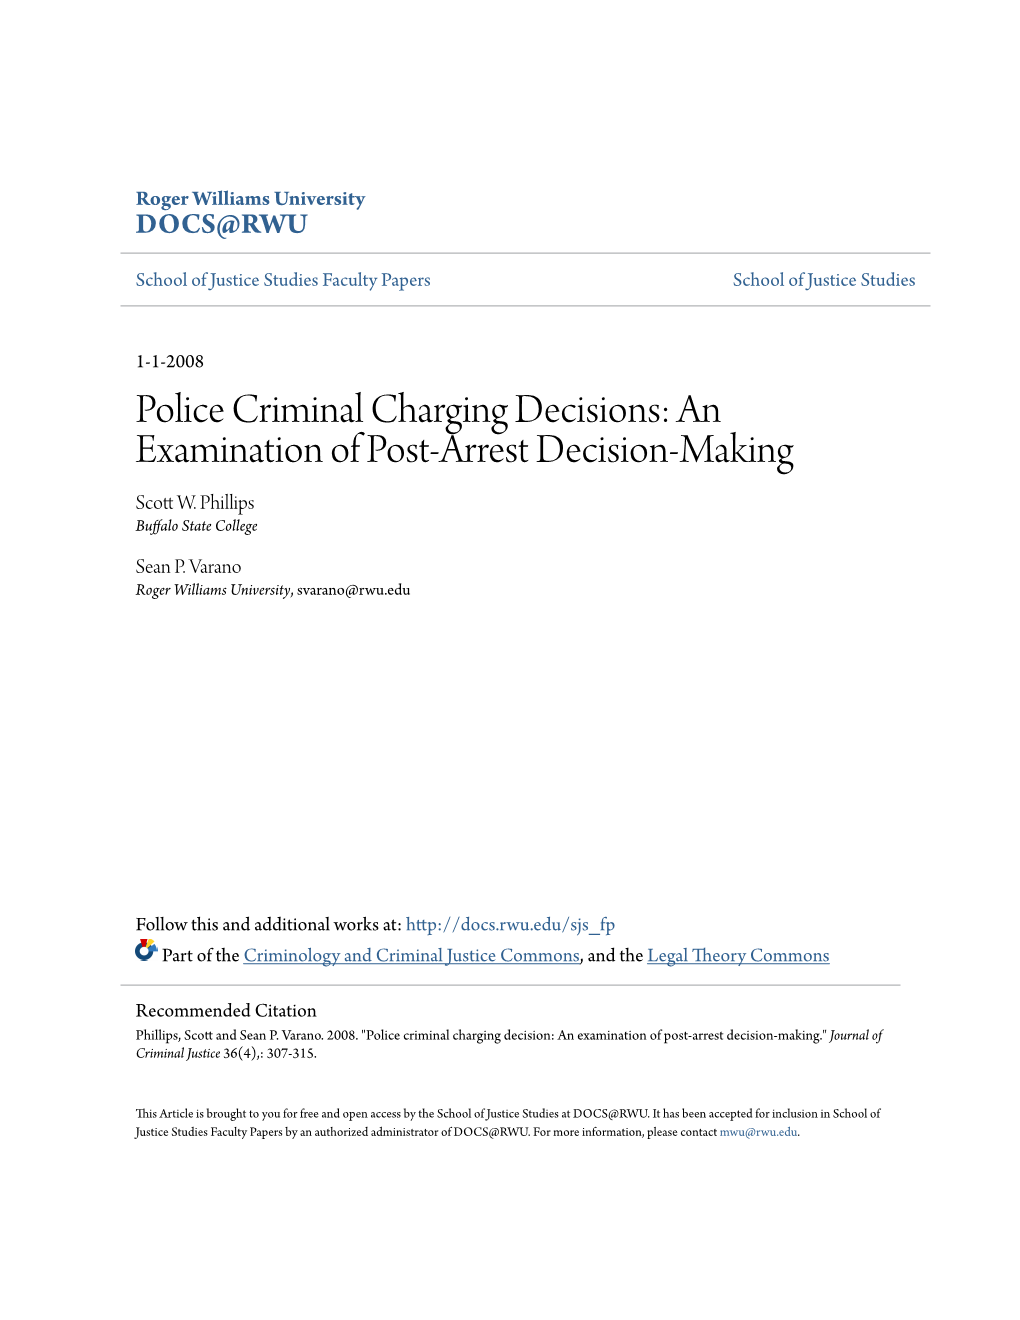 Police Criminal Charging Decisions: an Examination of Post-Arrest Decision-Making Scott .W Phillips Buffalo State College